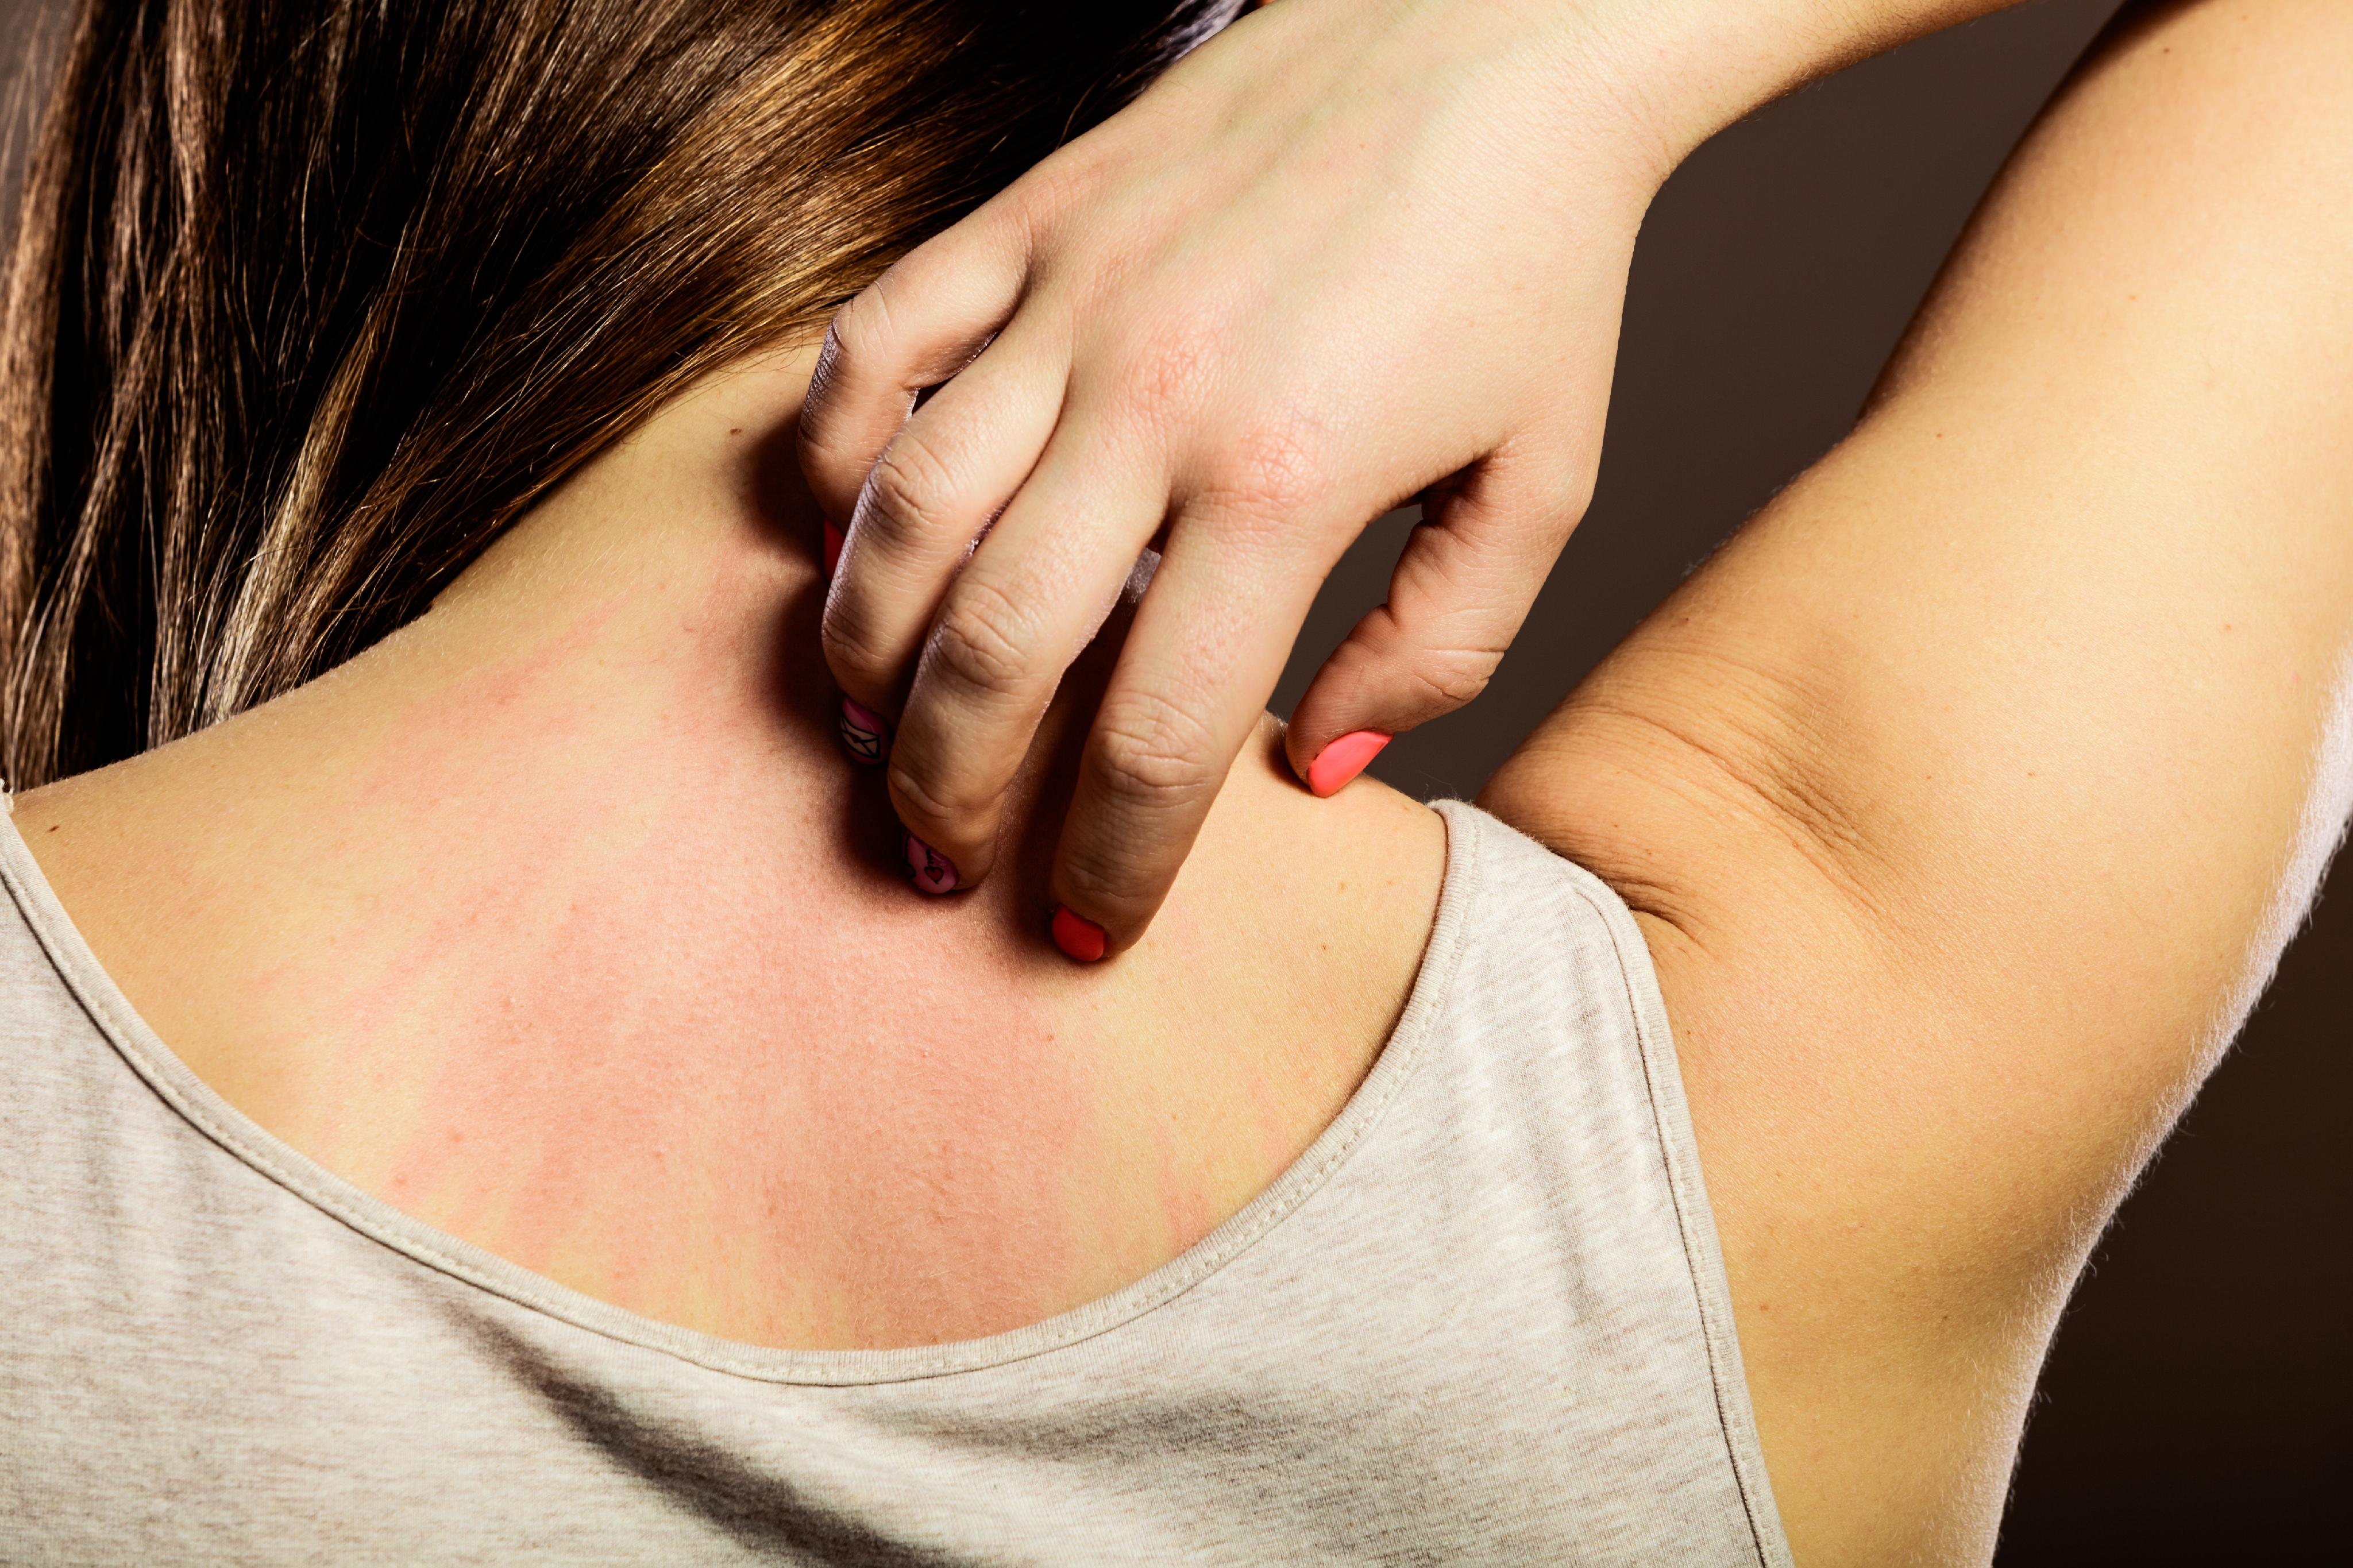 Skin Conditions | Hives | Acne | MedlinePlus